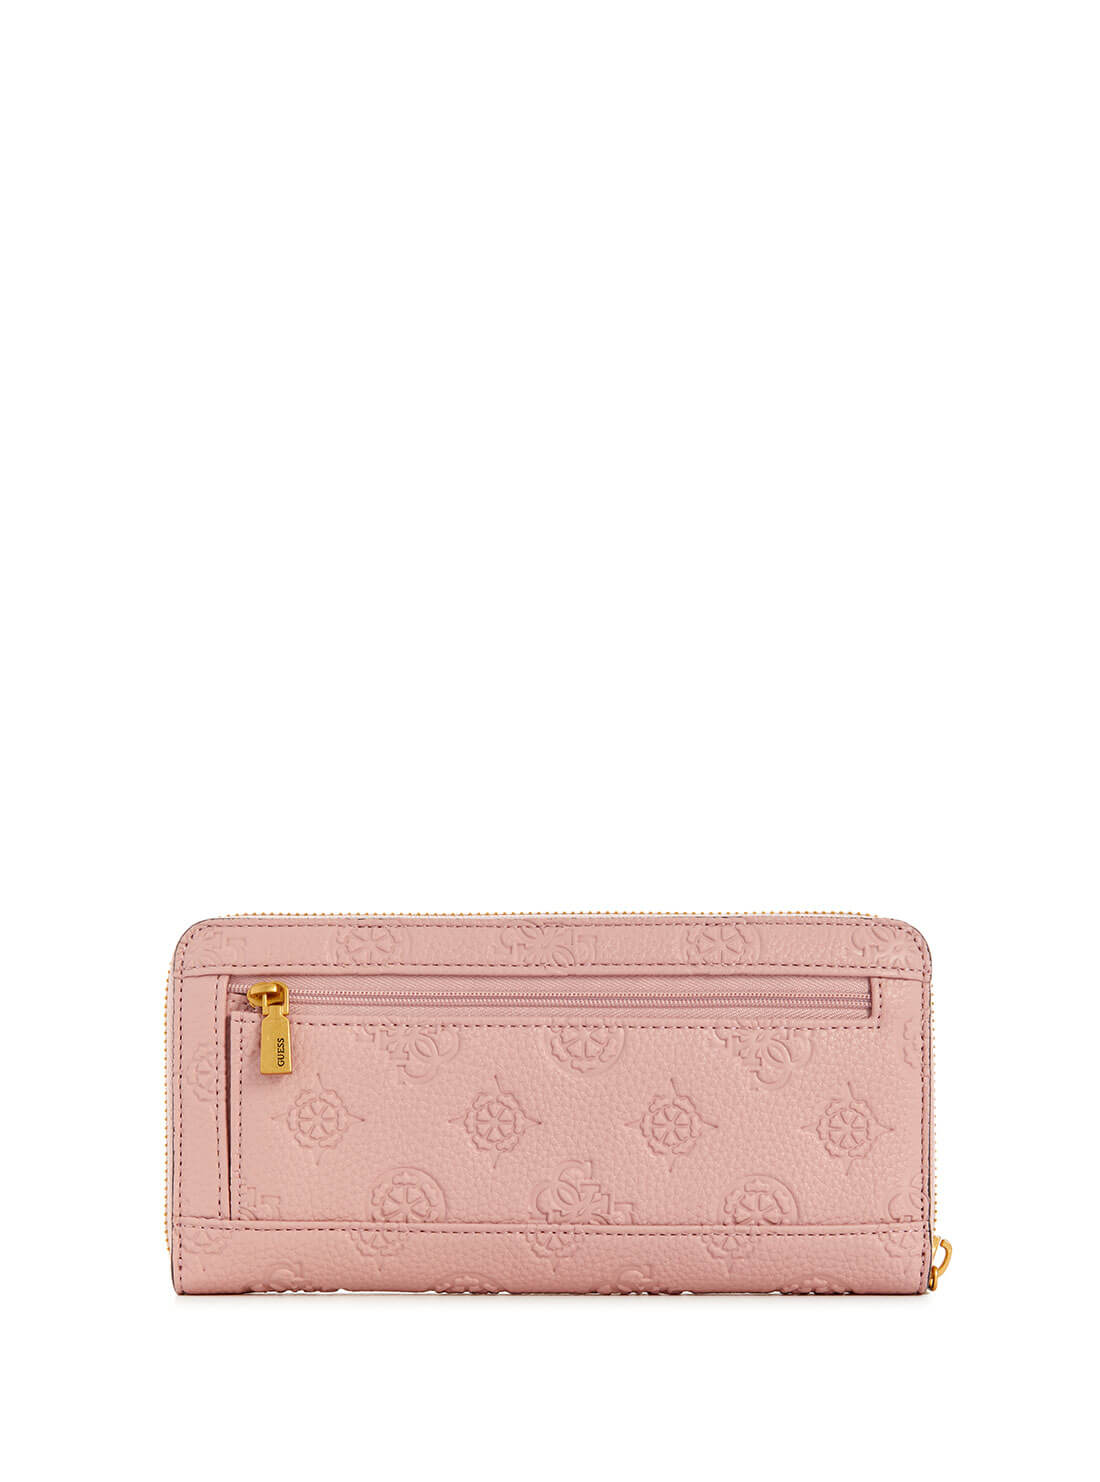 Women's Pink Izzy Large Wallet back view